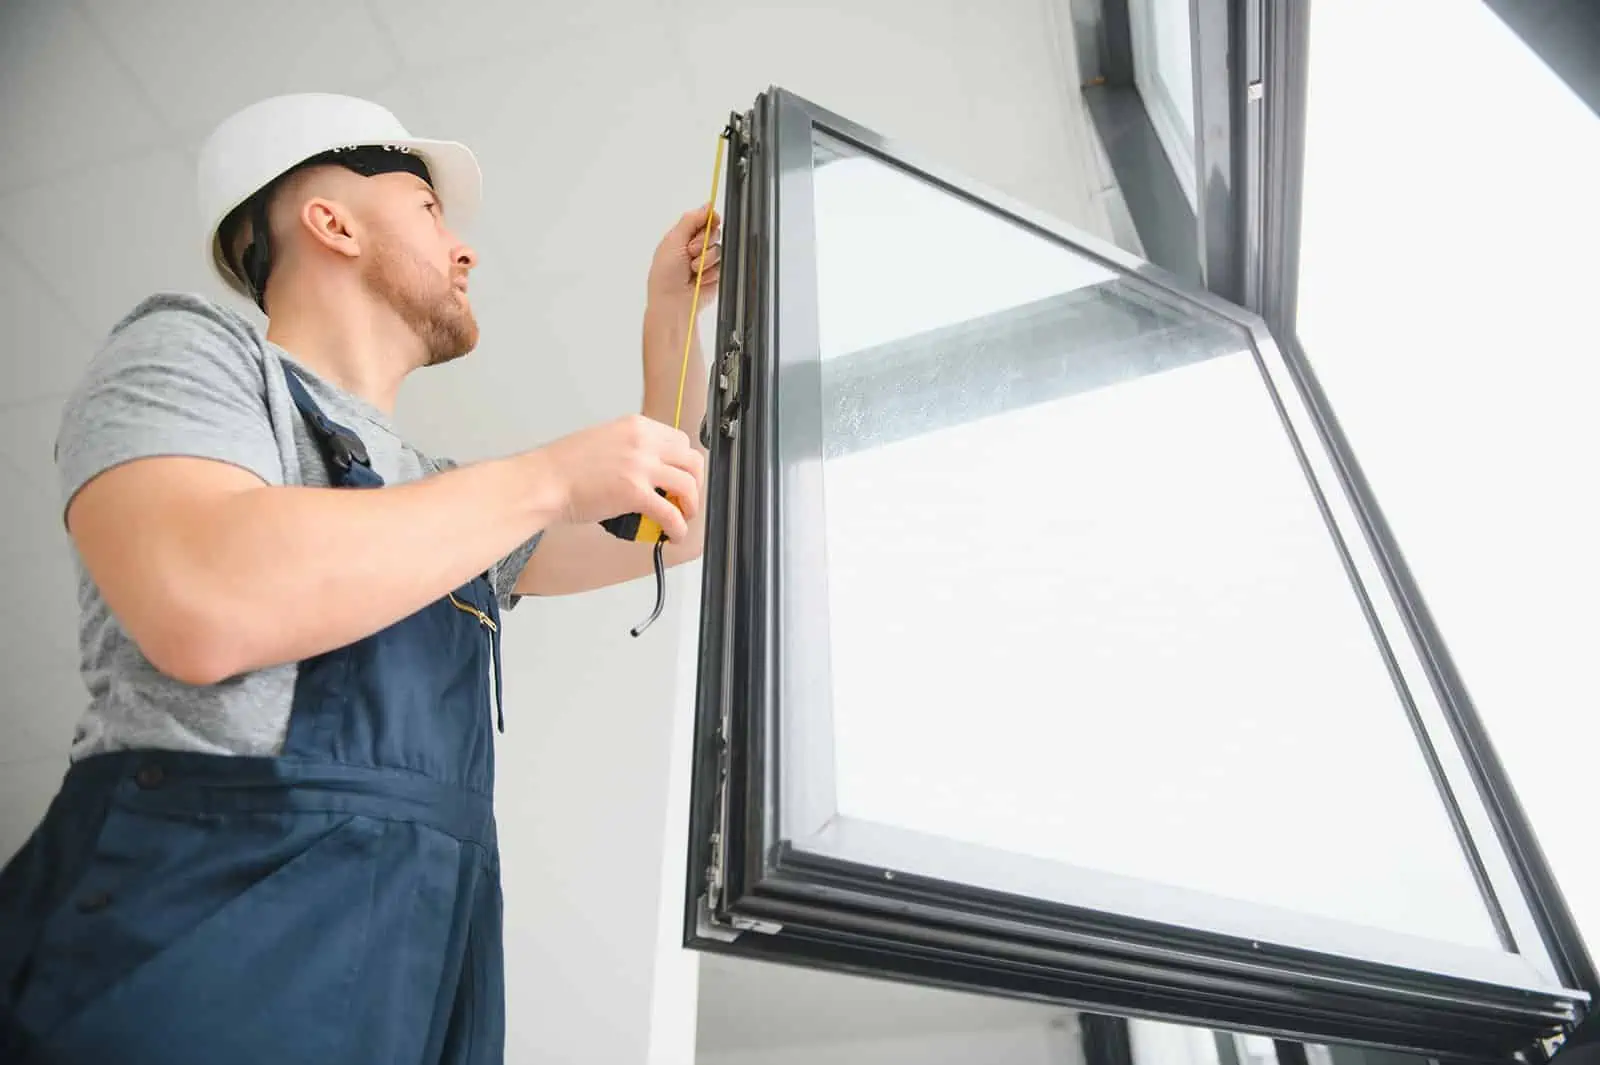 A man providing services working on a window while wearing overalls and a white hat.